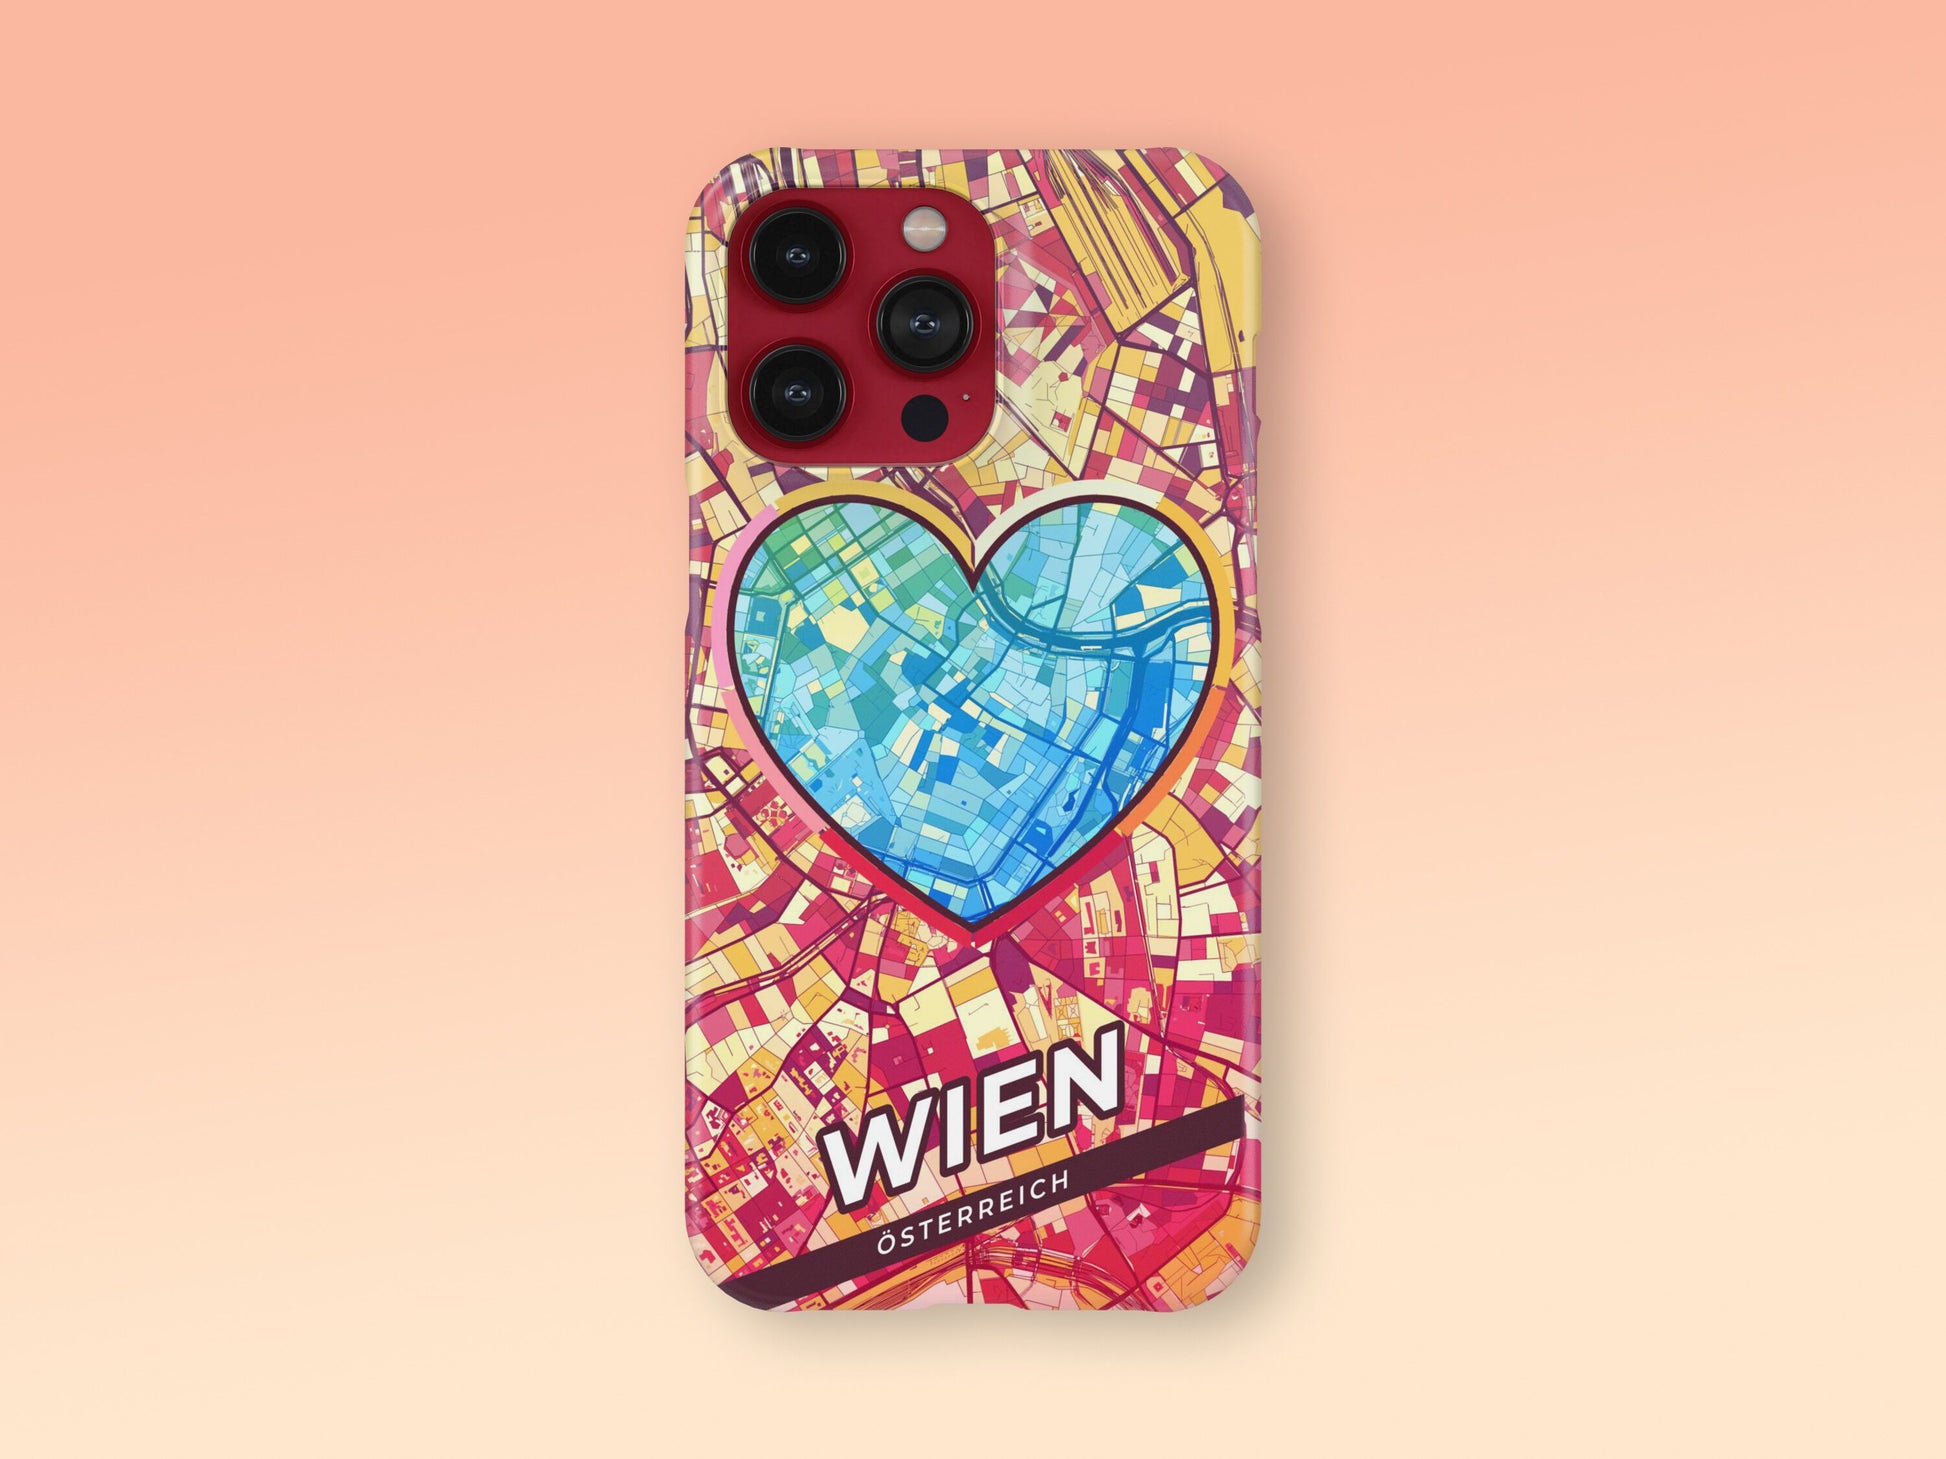 Wien Österreich slim phone case with colorful icon 2